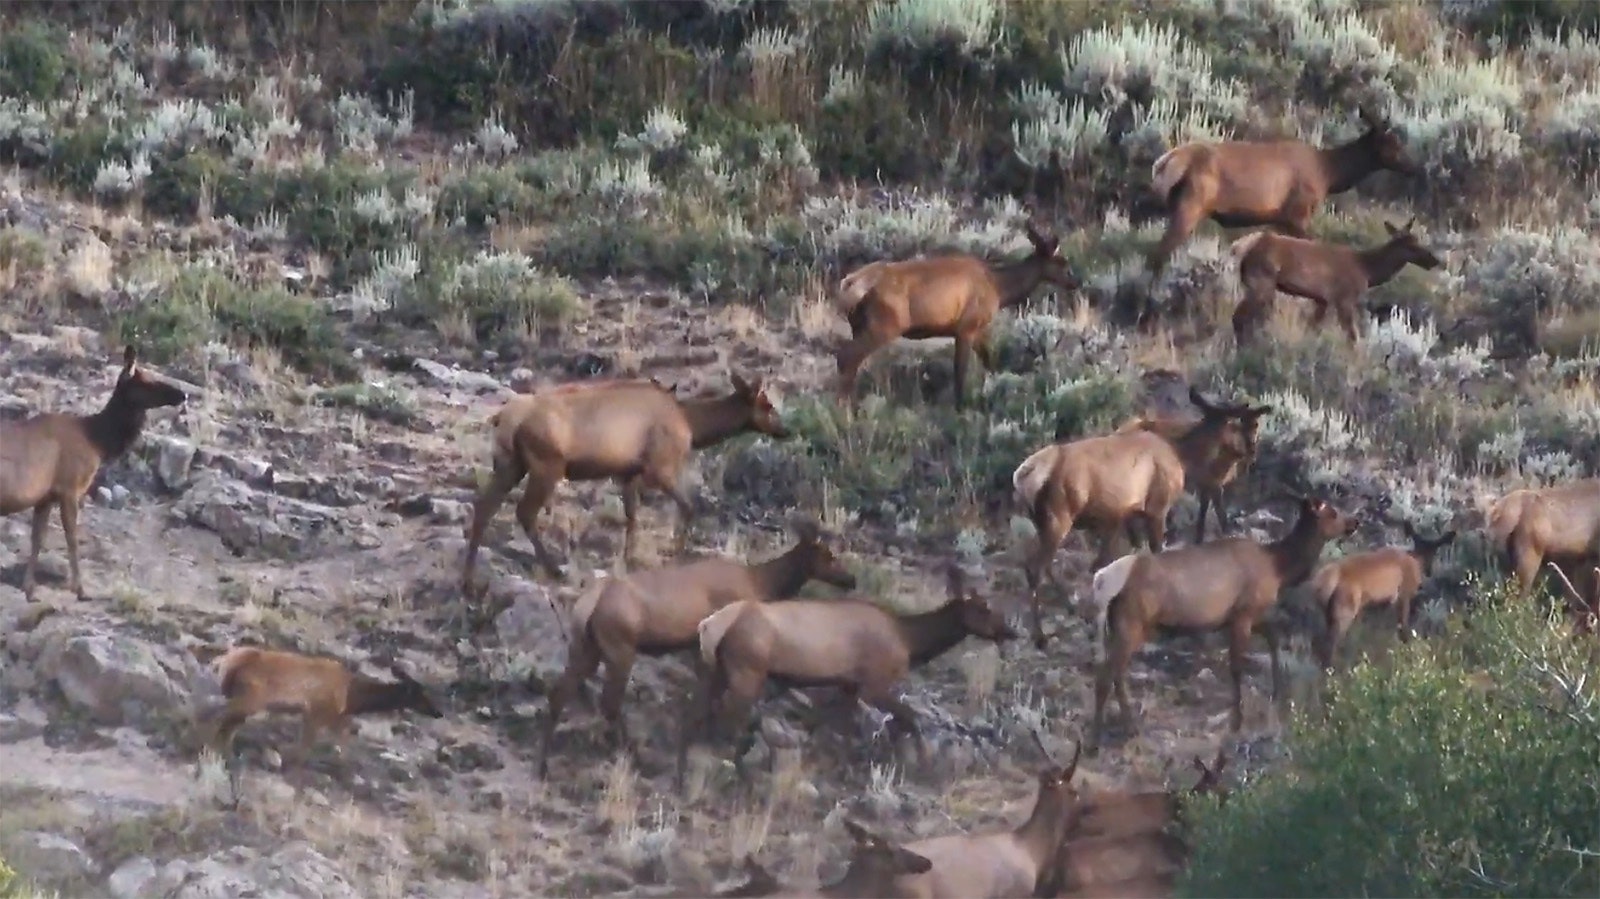 There are elk all over Wyoming, including the state's northeast plains.